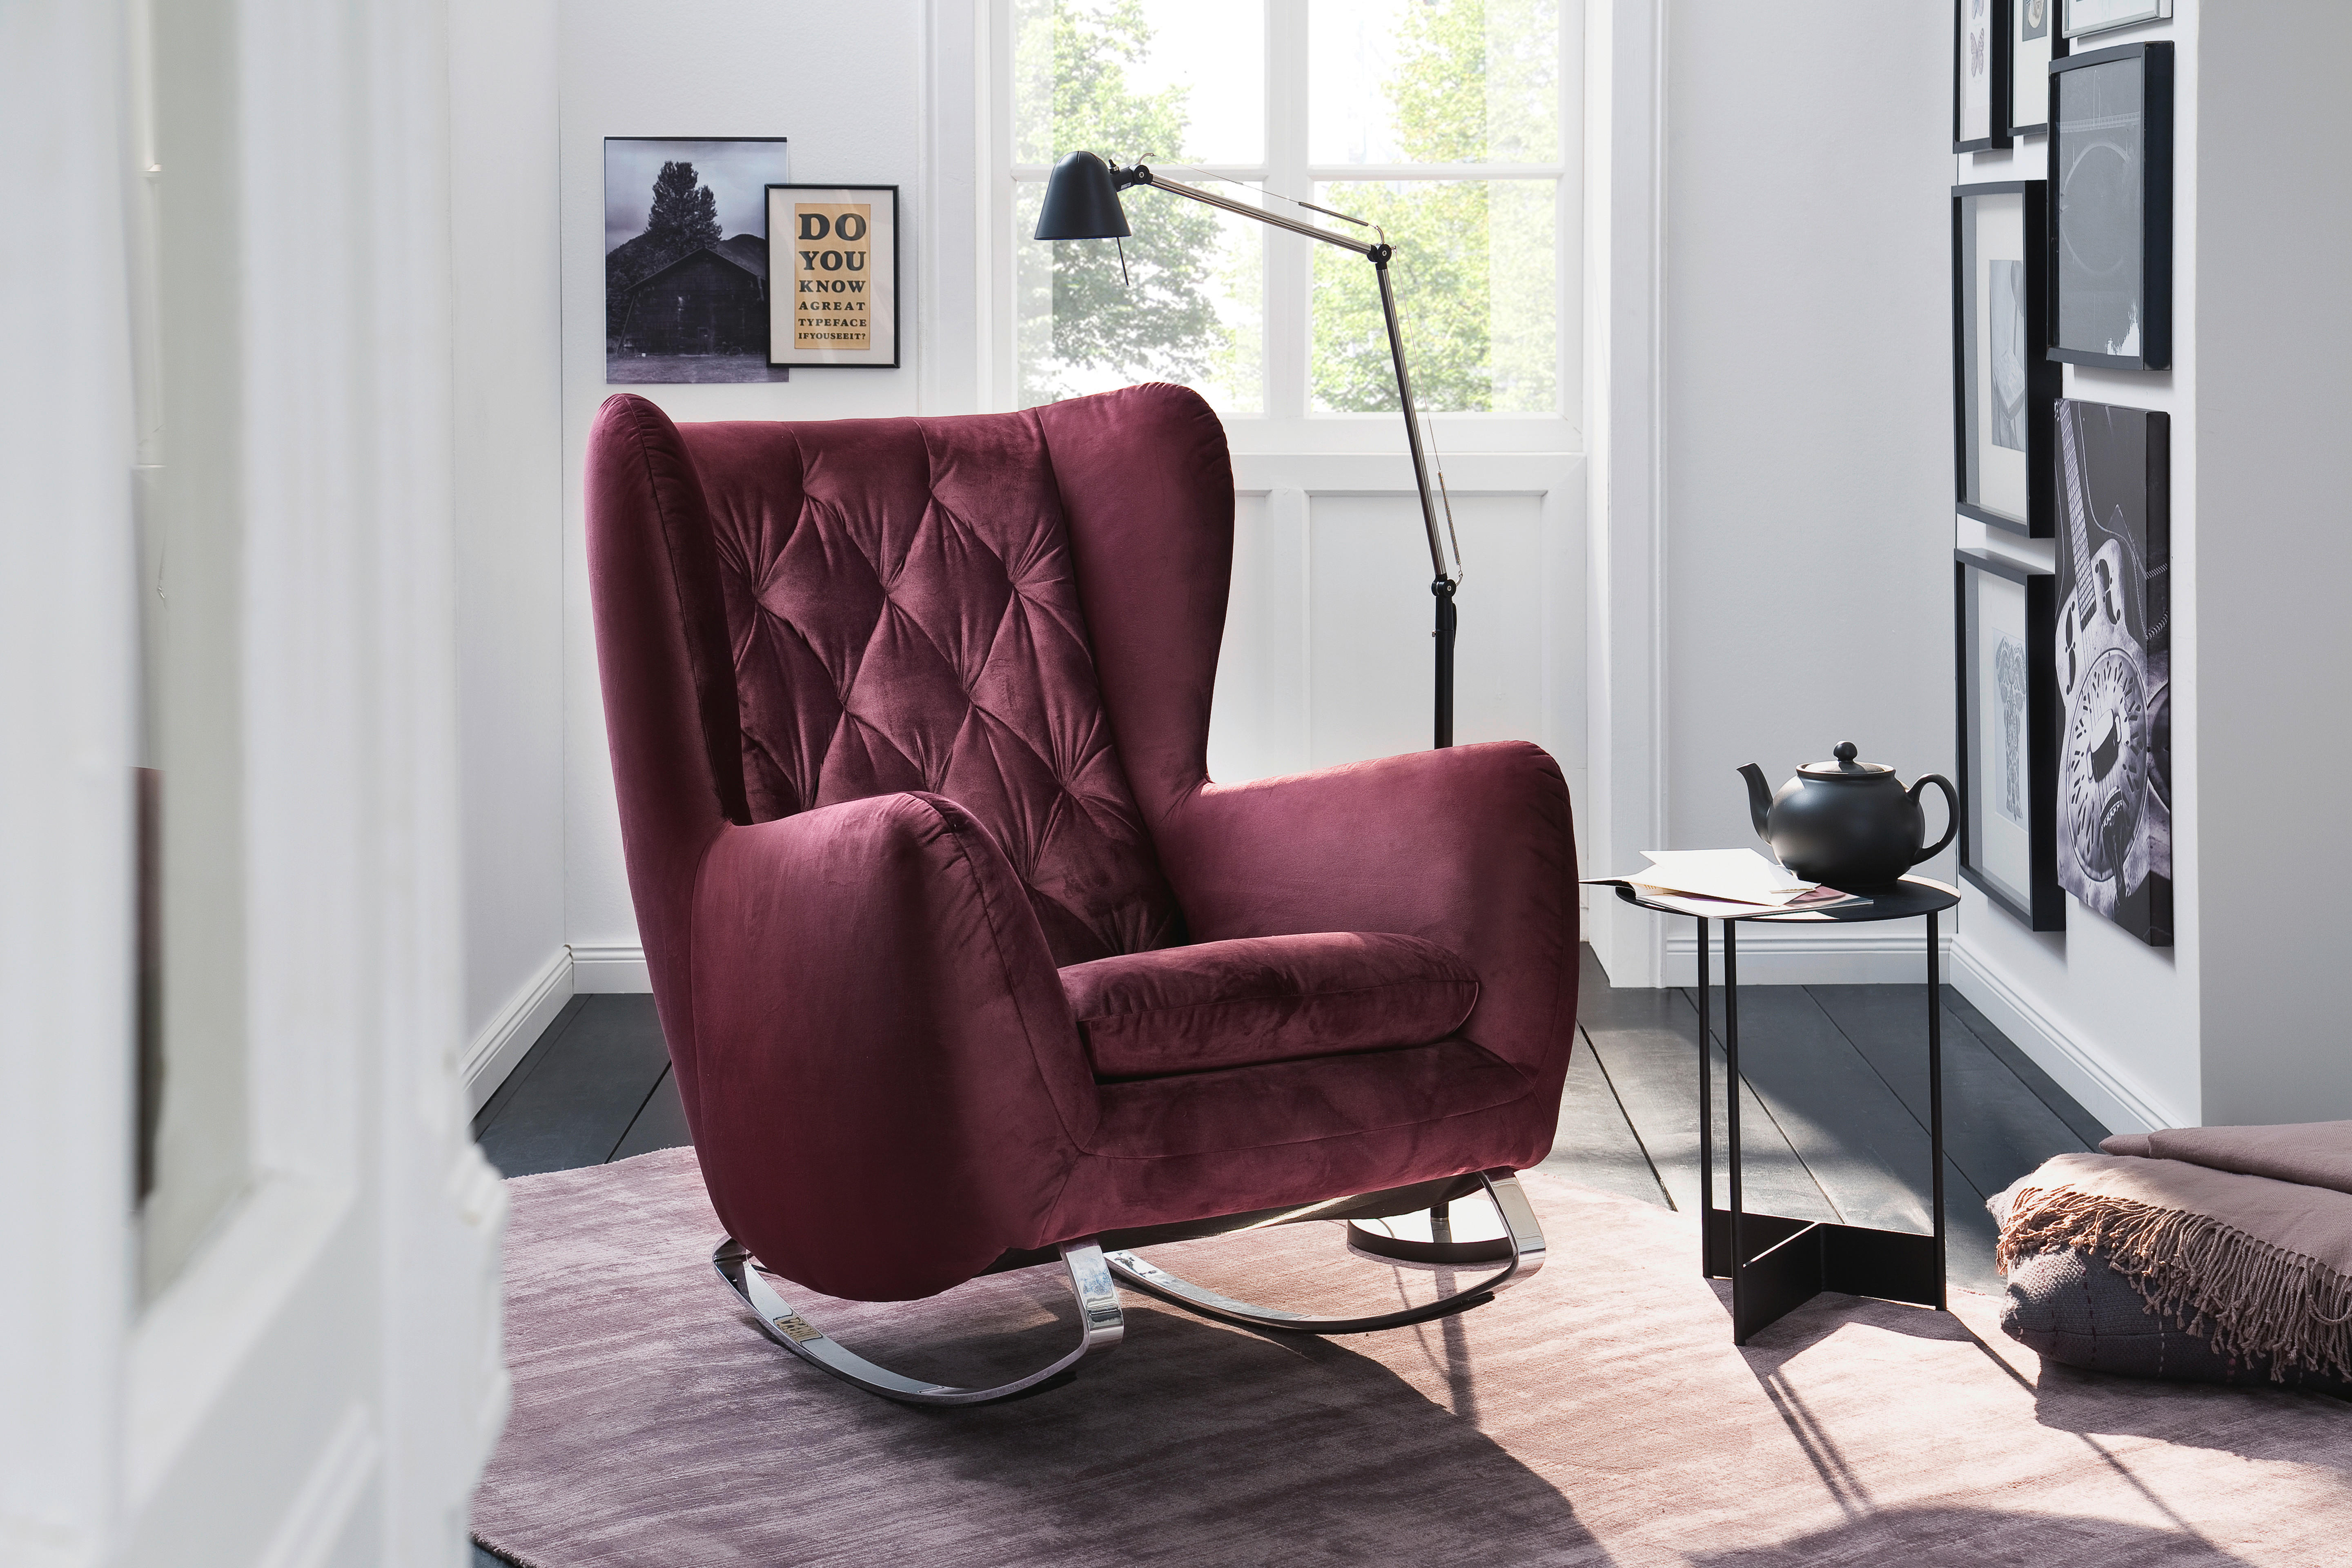 CHESTERFIELD-SESSEL Velours Lila, Beere    - Chromfarben/Beere, Design, Textil/Metall (82/109/93cm) - Pure Home Lifestyle